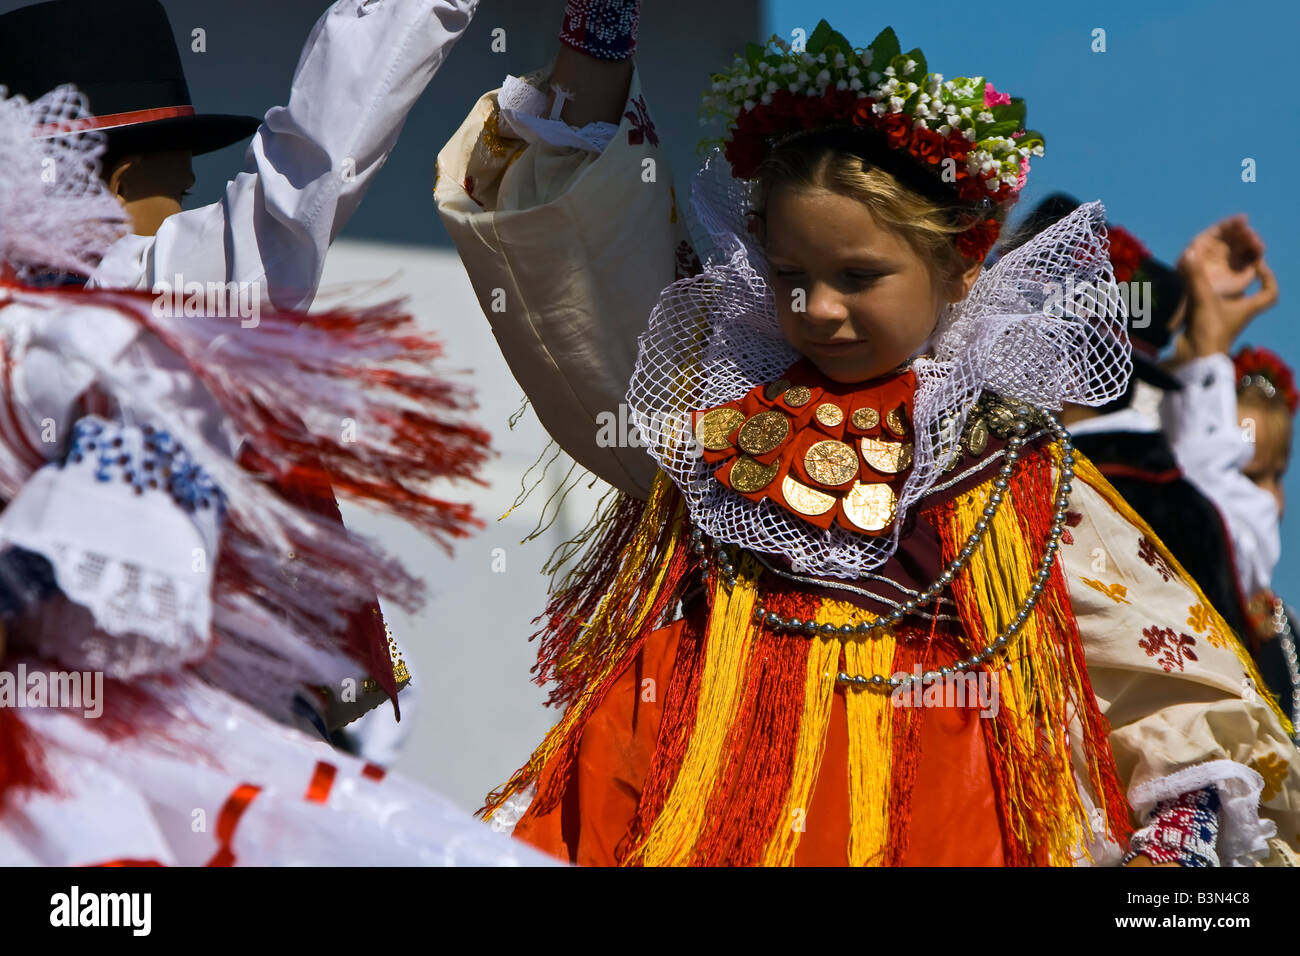 Young girl dancing in the Croatian traditional dress with ducats on the dress and headdress on a folklore festival in Croatia. Stock Photo